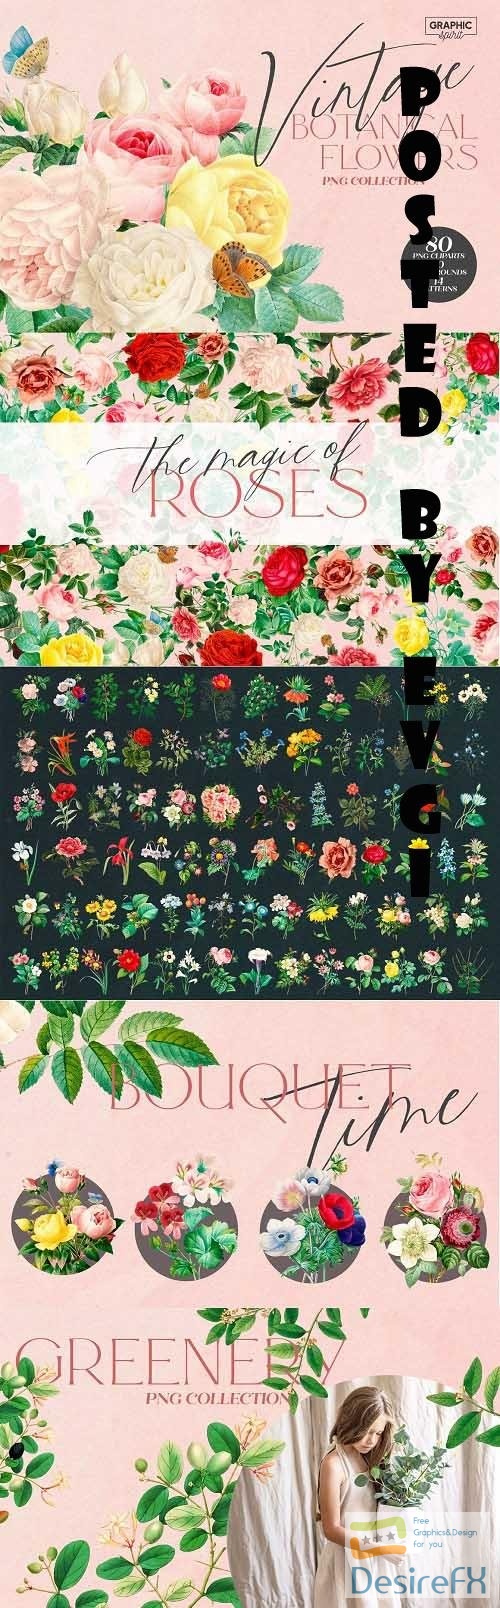 Aesthetic Vintage Flower PNG Clipart - 6221182